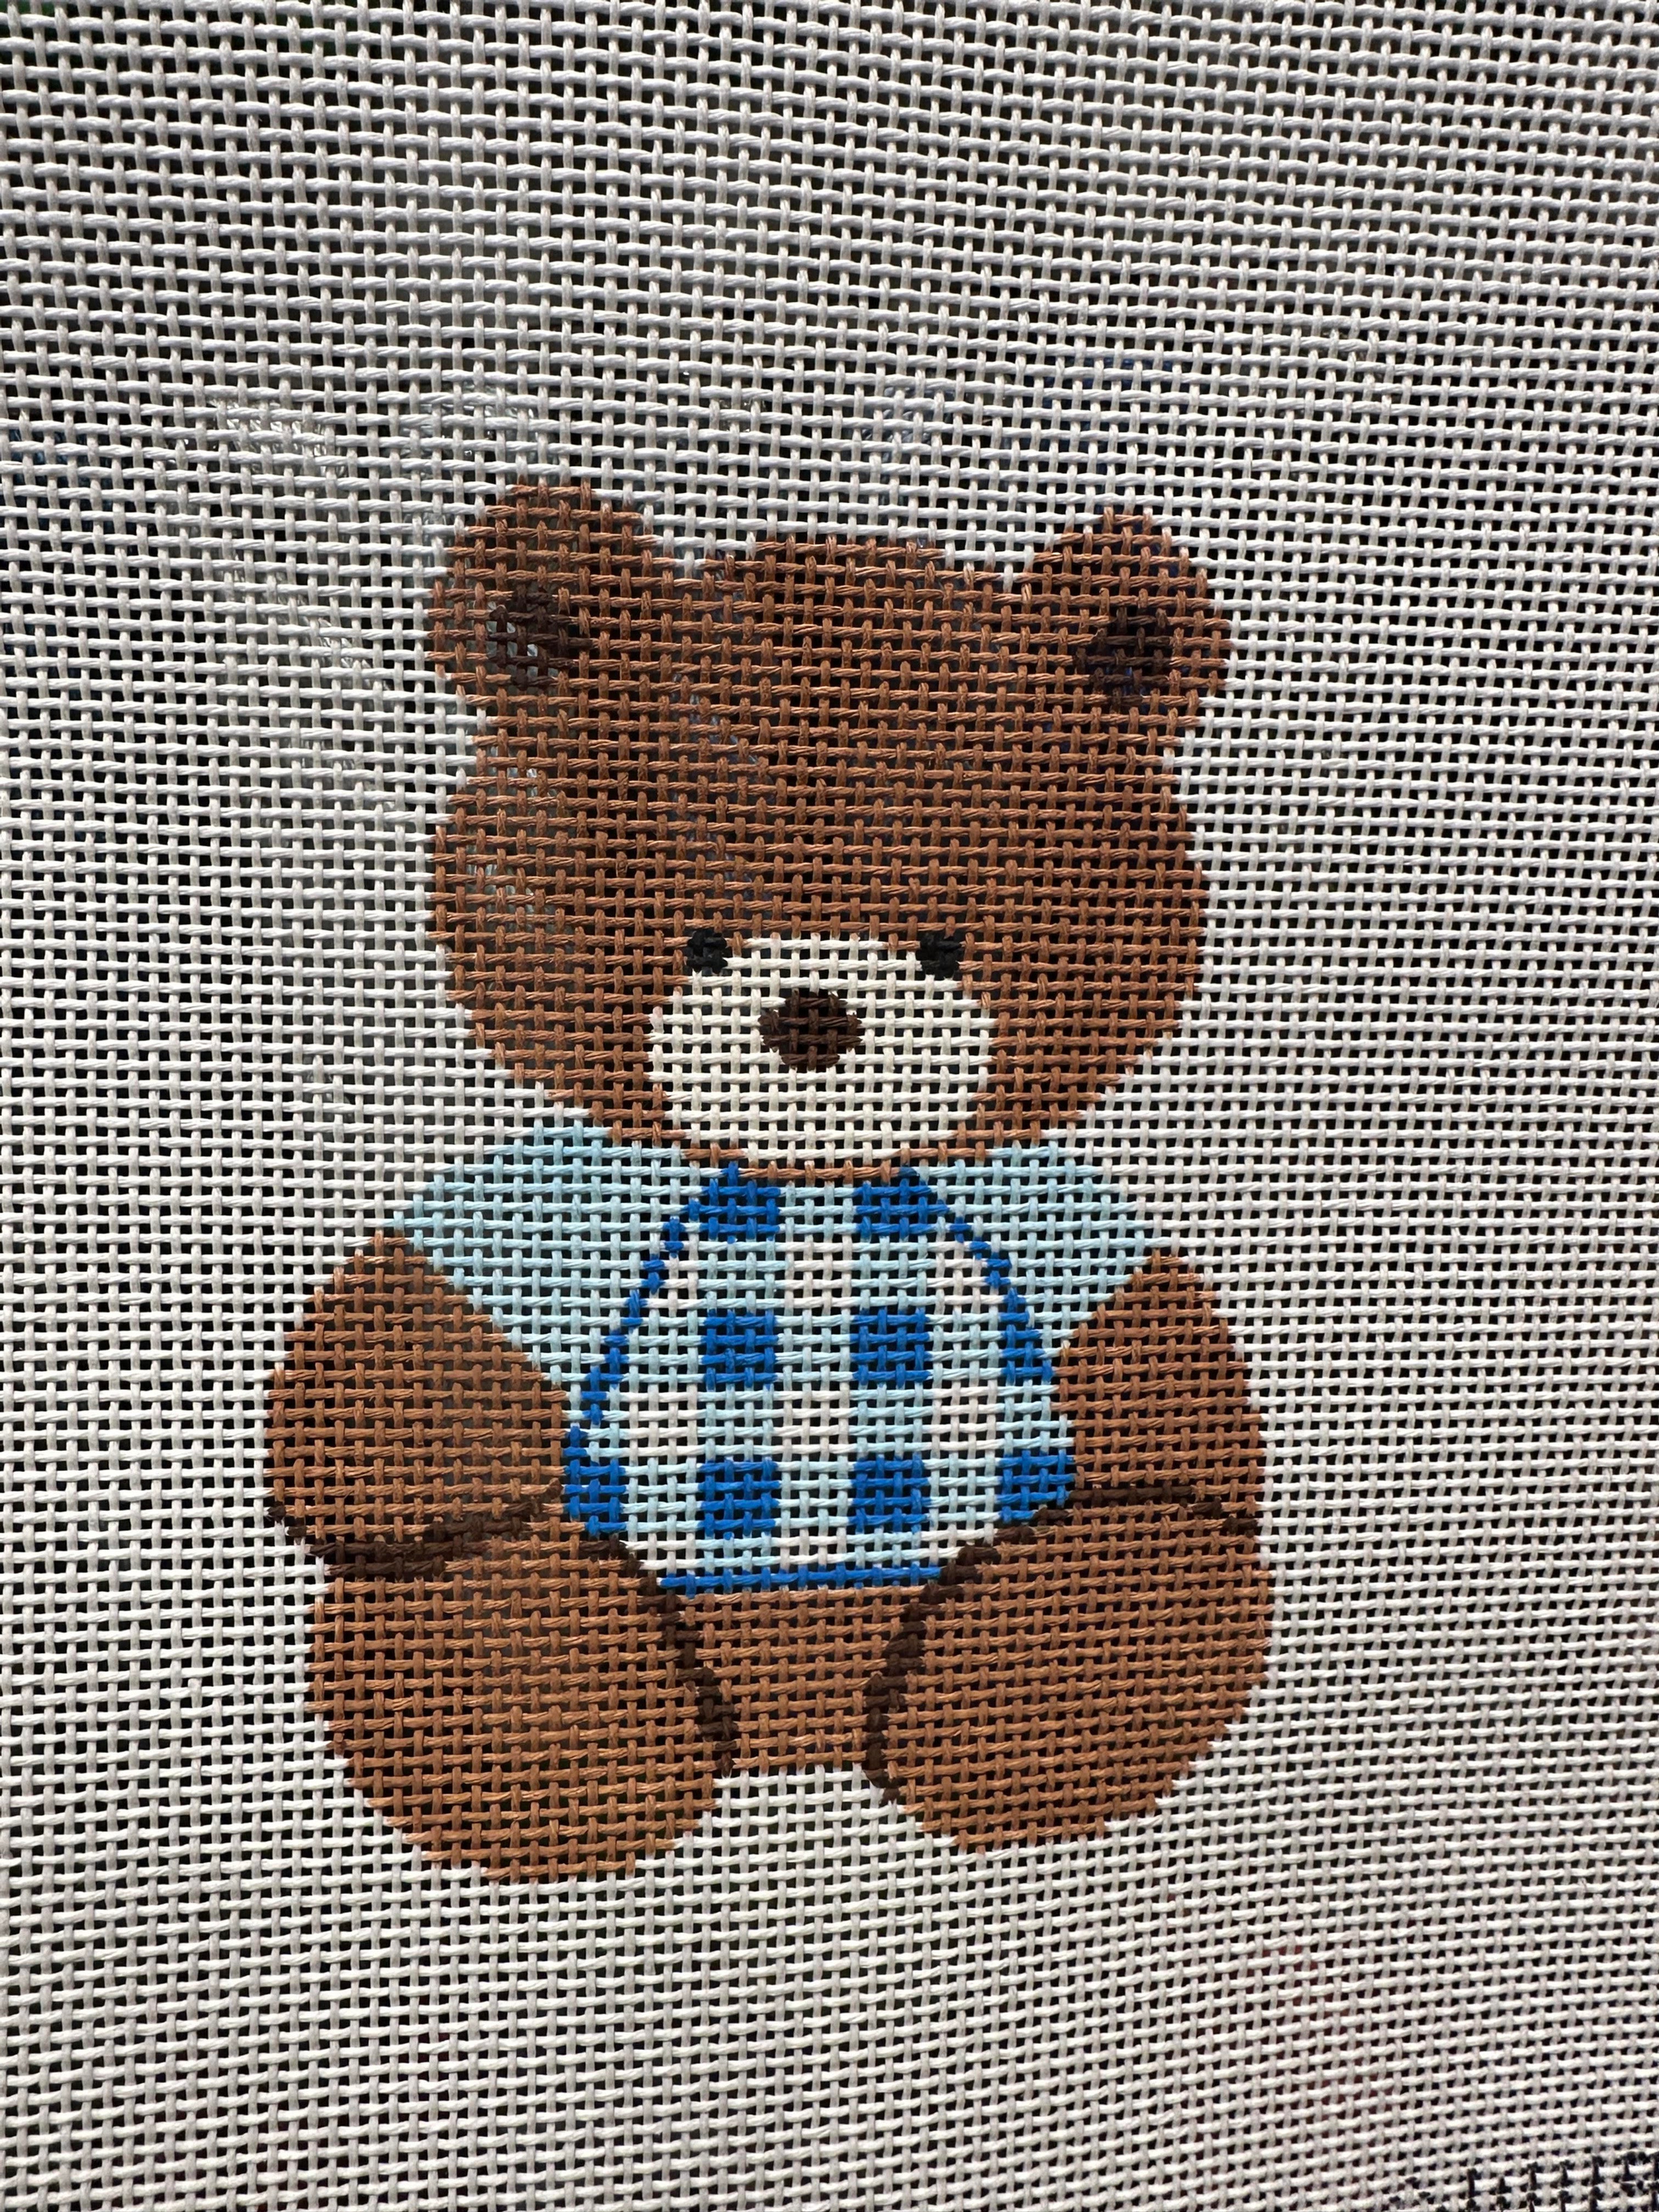 Audrey Wu AW119 Bear with Blue Gingham